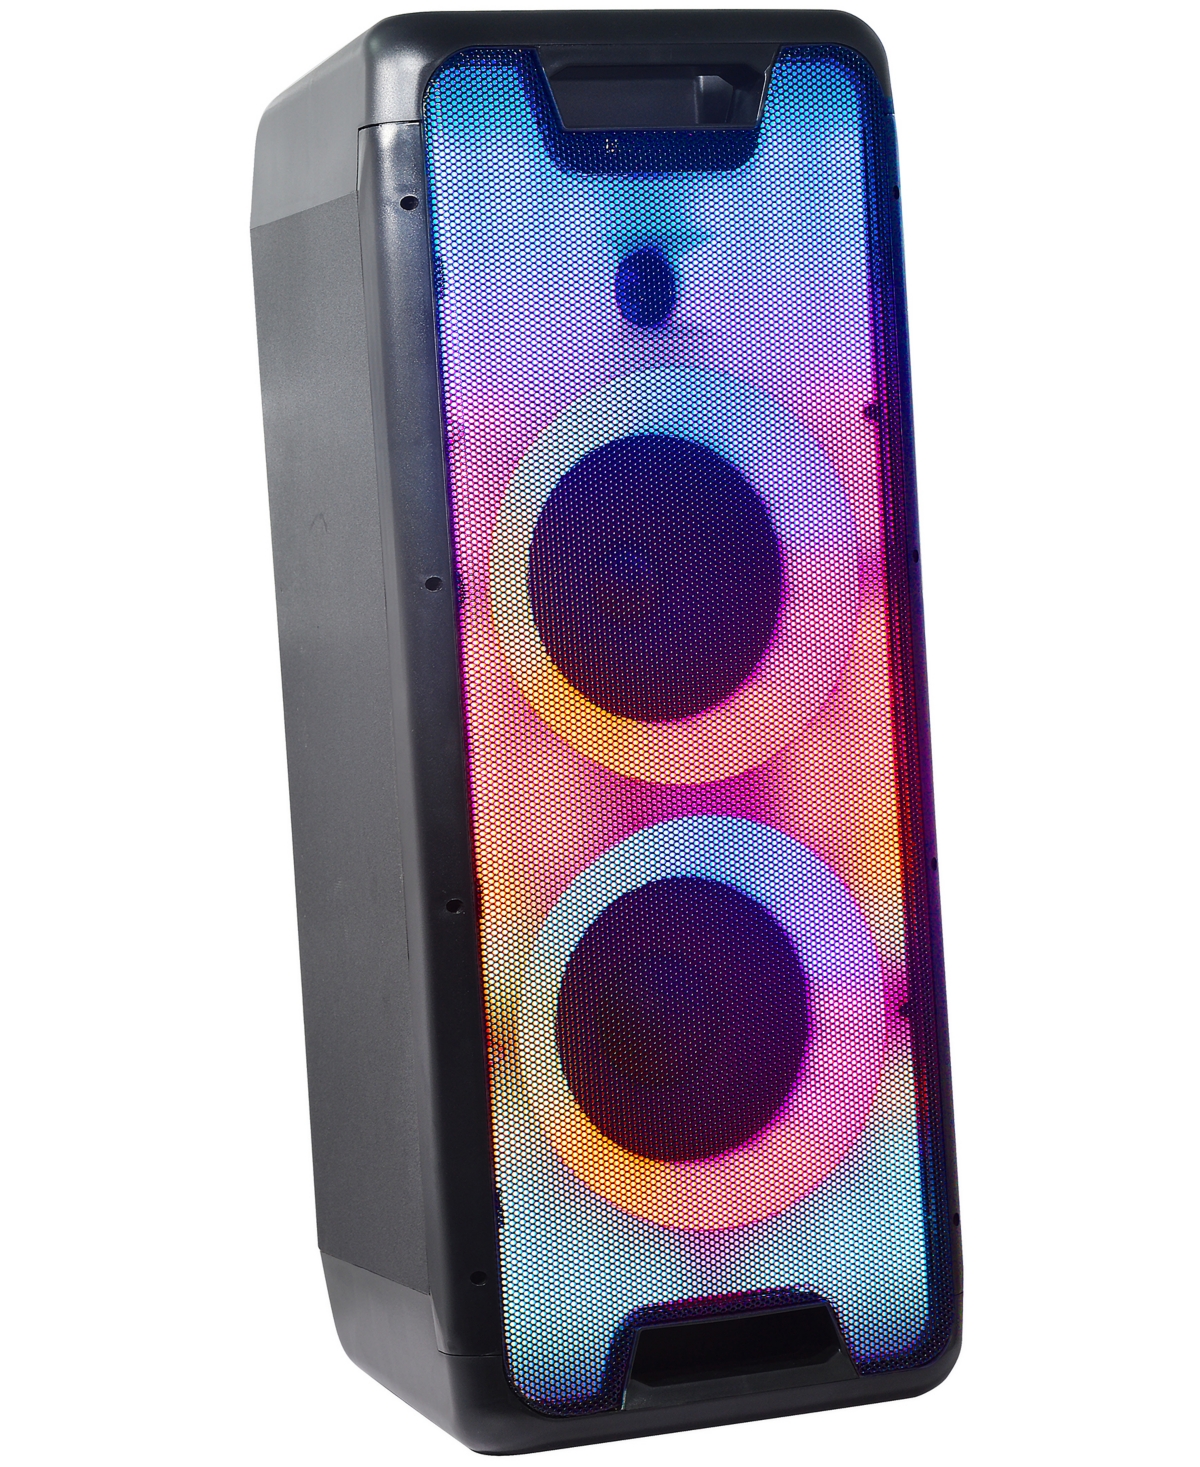 Gemini Gls-880 Dual 8" Portable Party System In Black